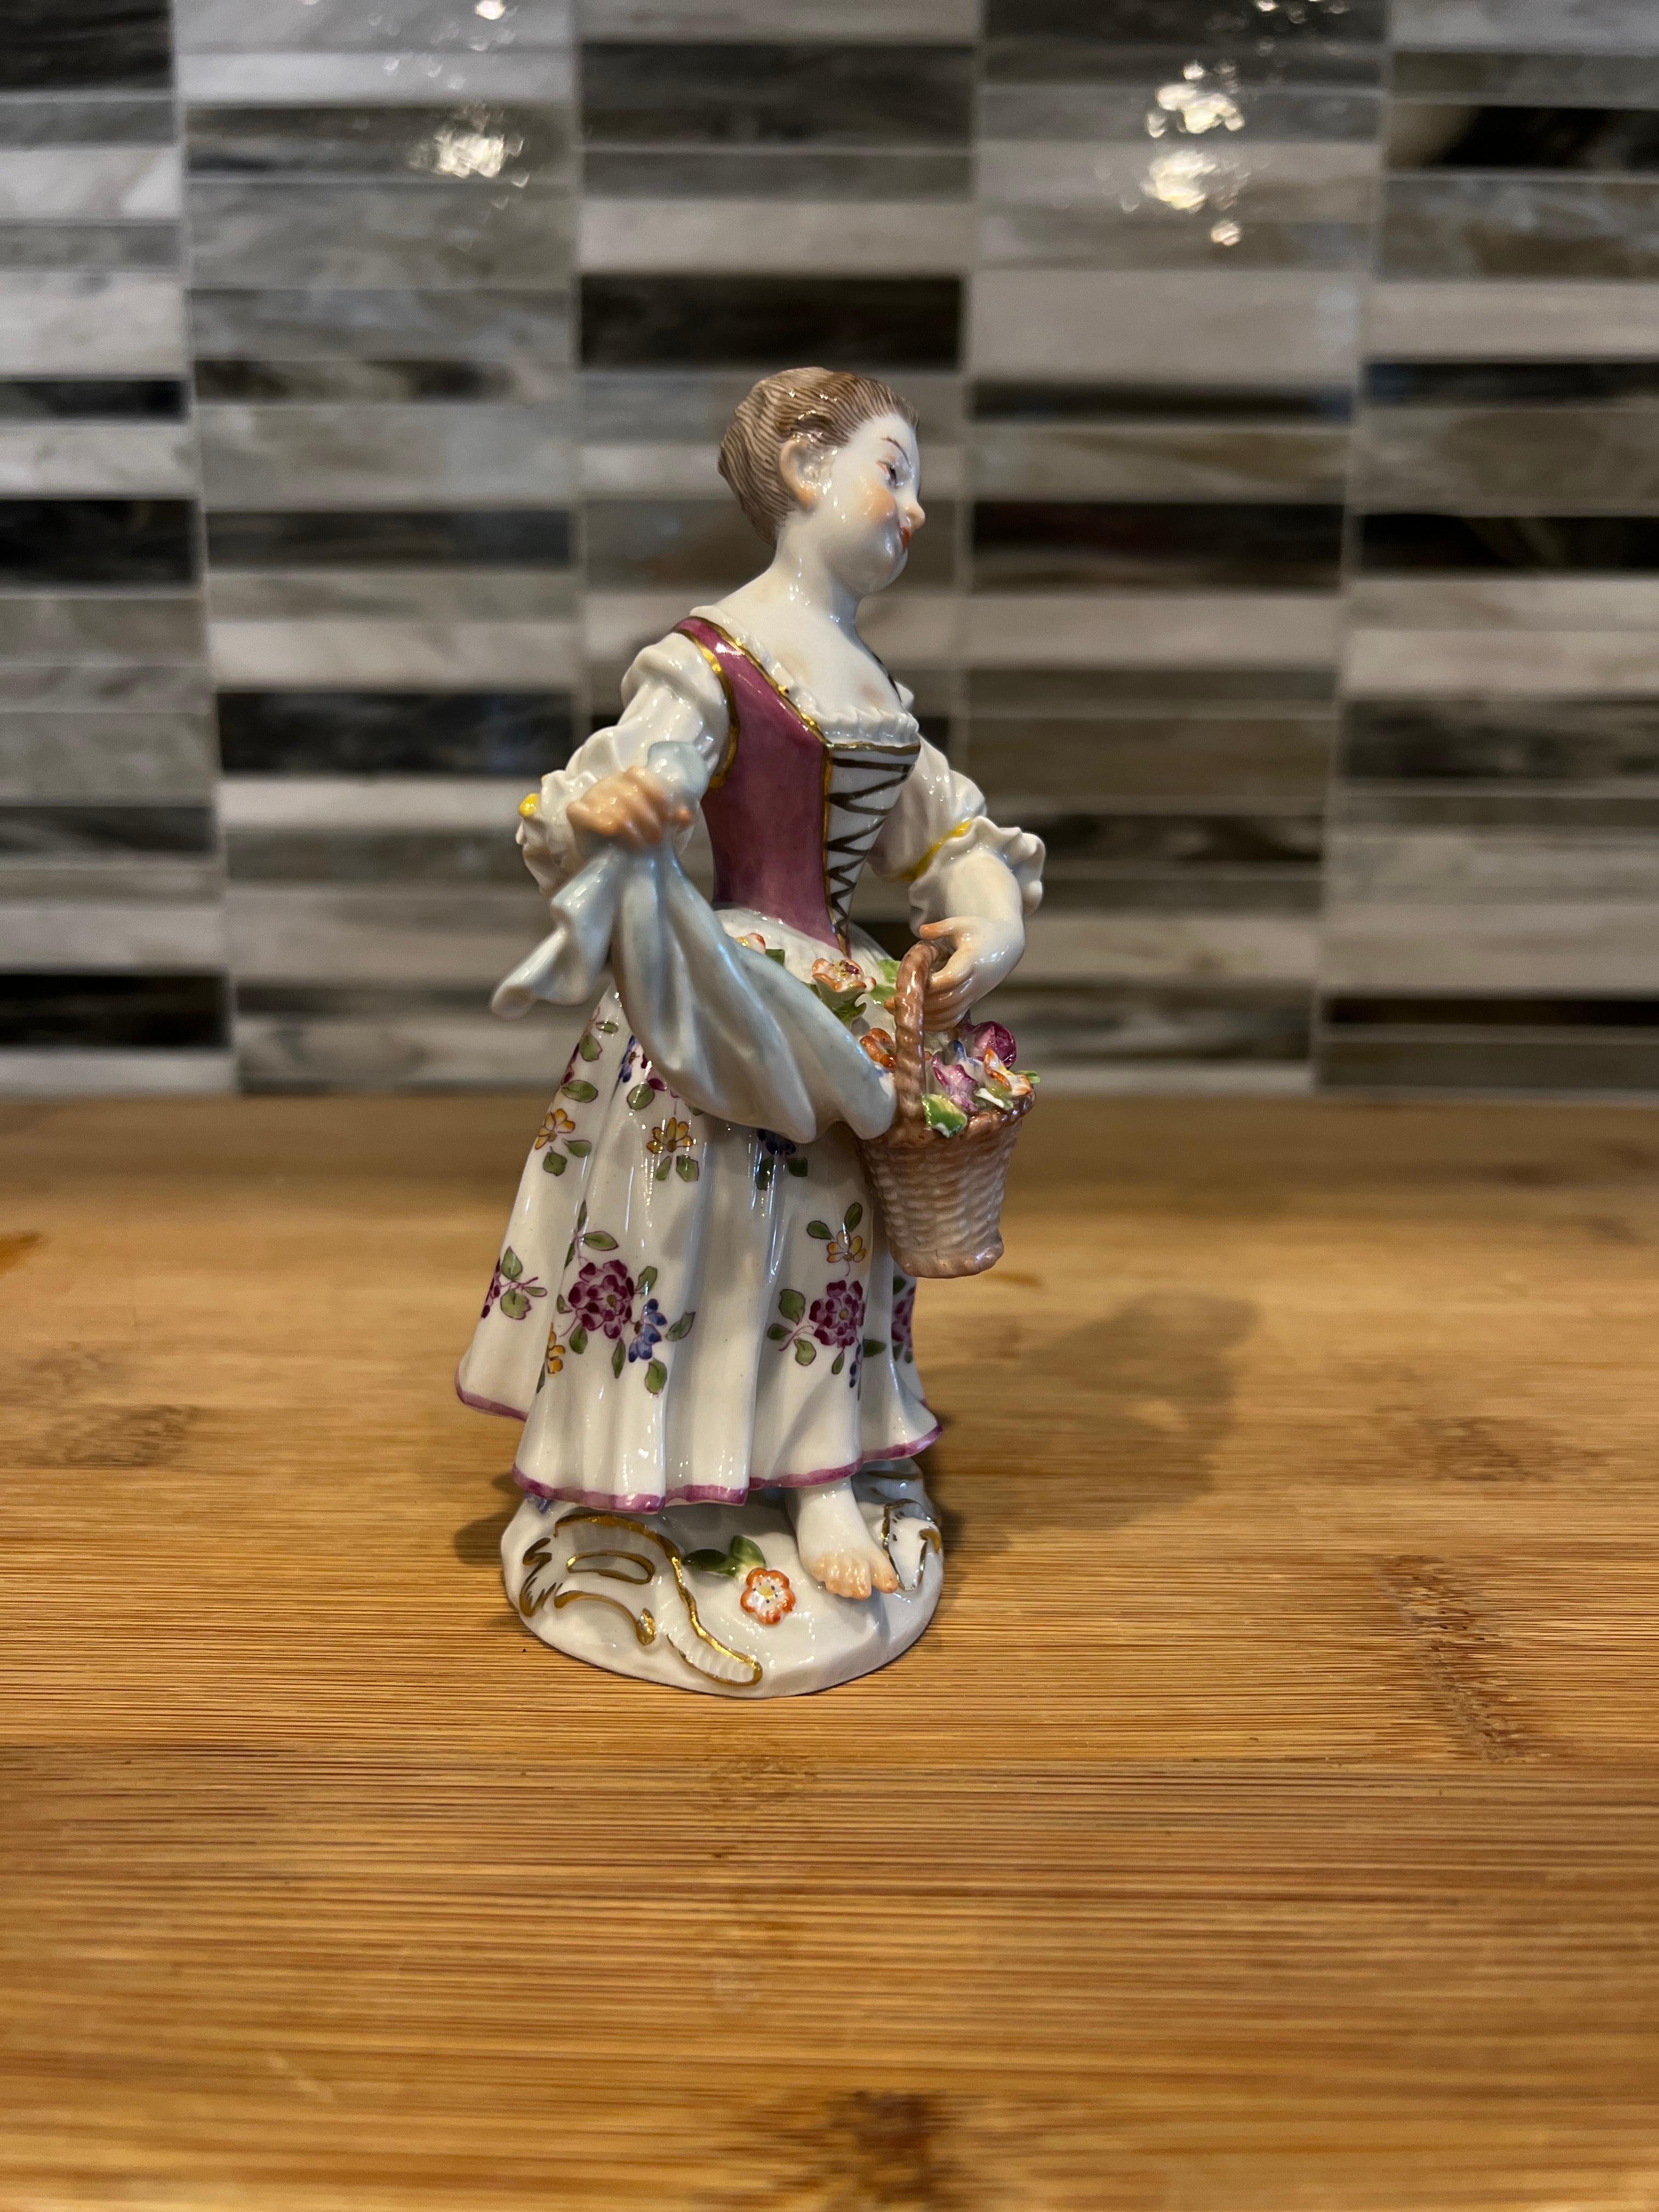 Nice small figurine of a little girl in dress and flowers, made by famous German manufactory Meissen.  The model was created in 1770s by Johann J. Kändler as a part of 